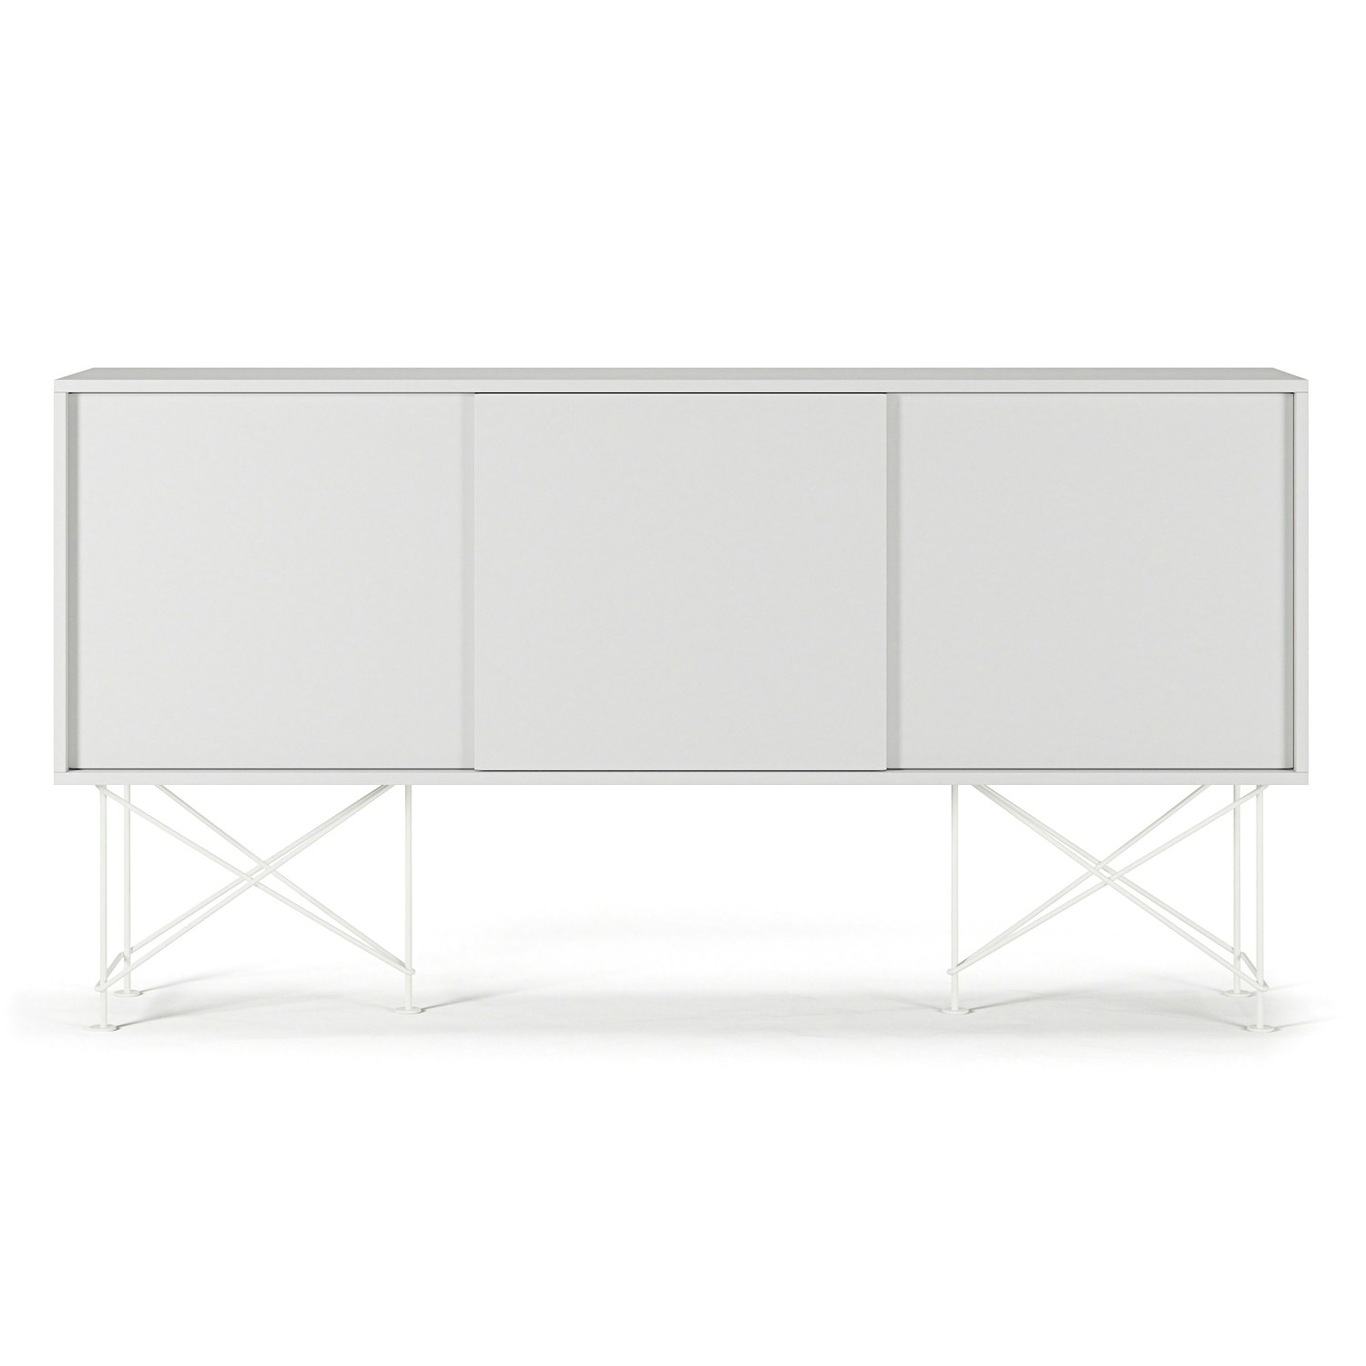 Vogue Sideboard With Stand 180 cm, White / White